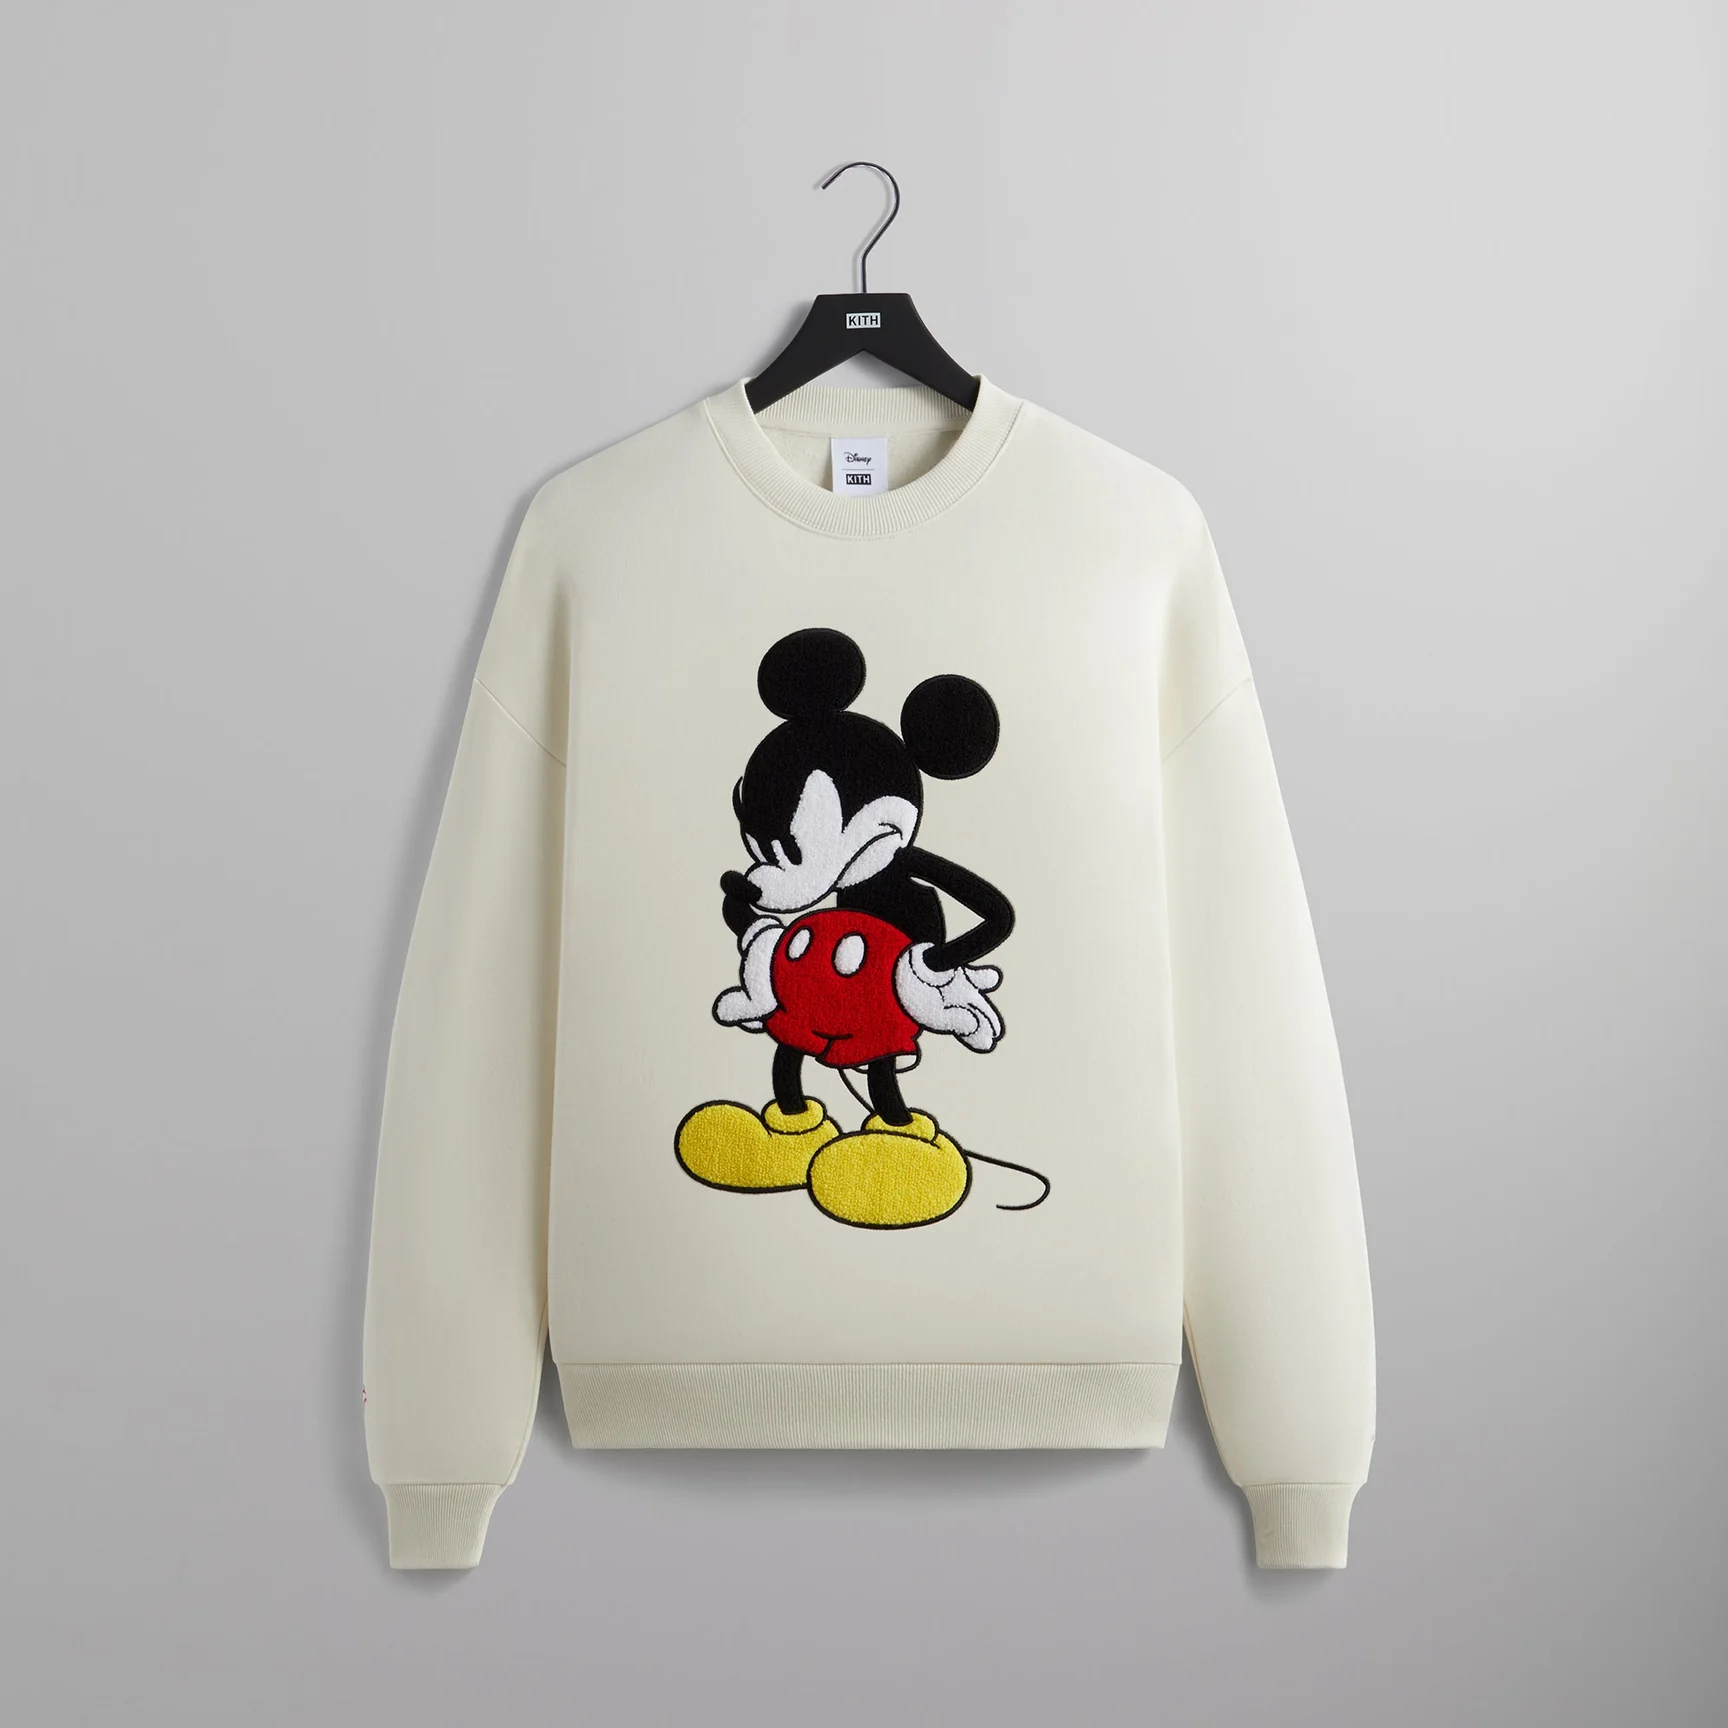 Cream-colored sweatshirt with animated character graphic design on hanger